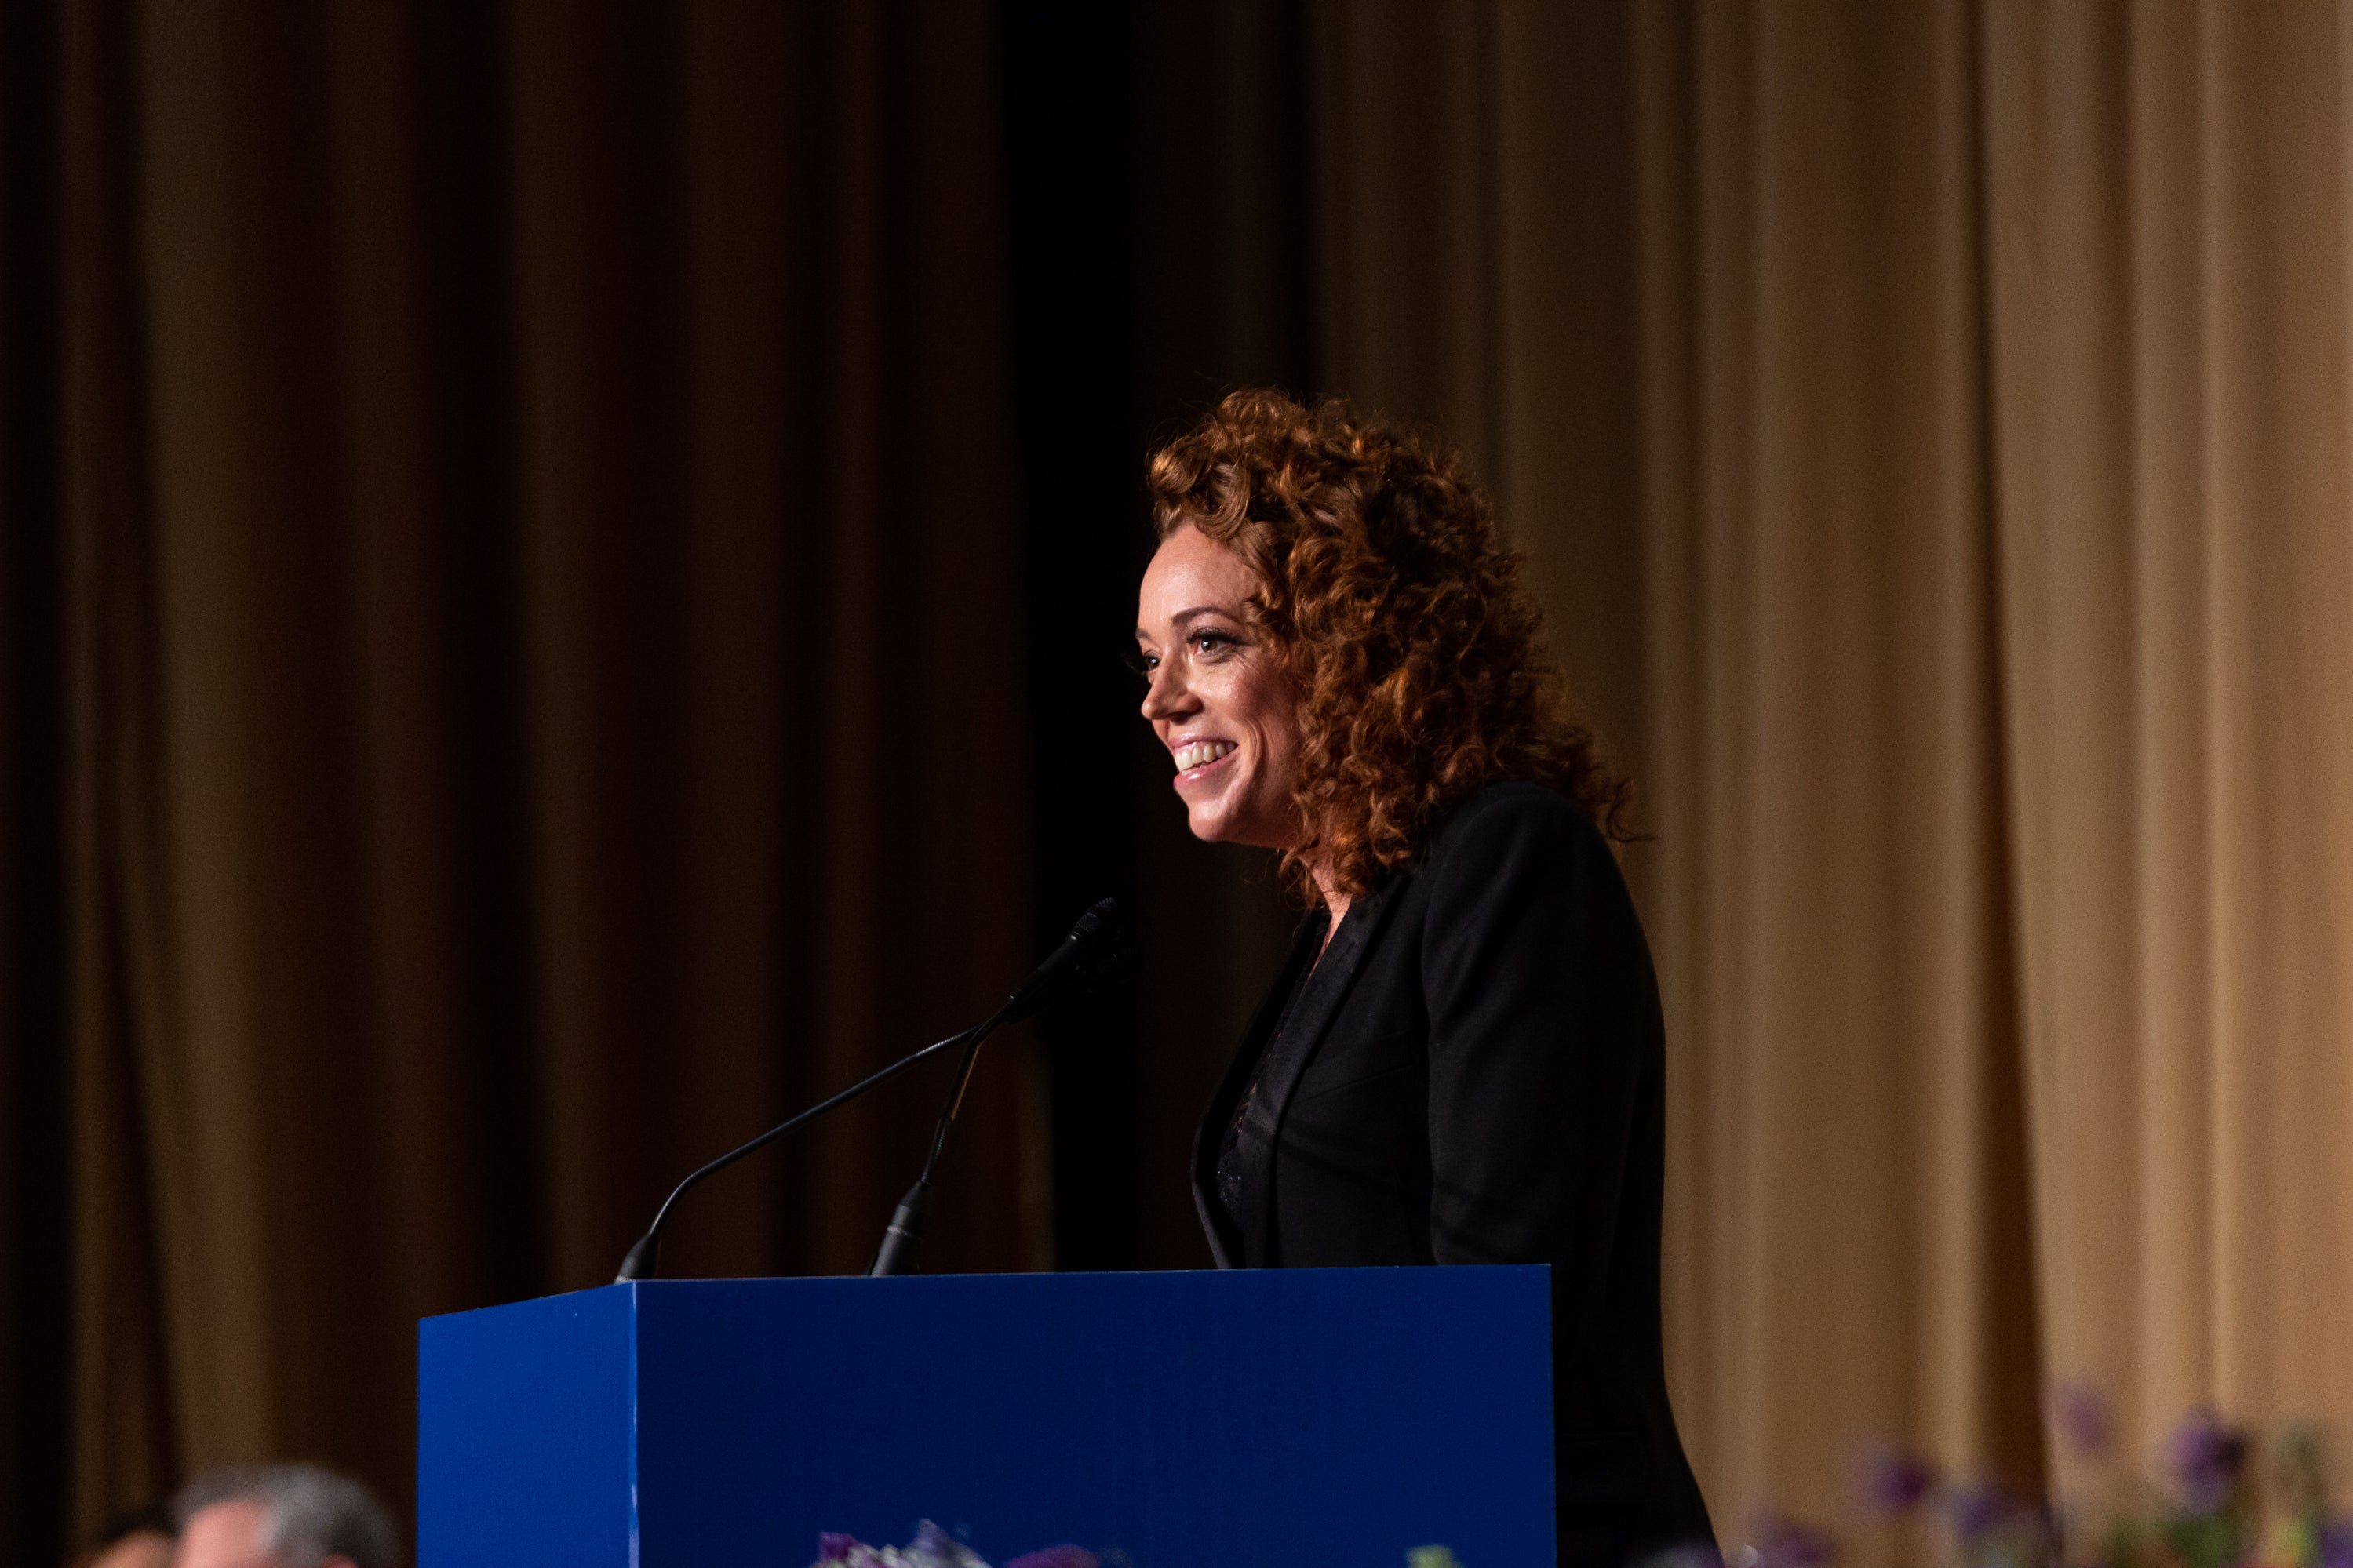 Comedian Michelle Wolf Rejects Criticism That She Mocked Sarah Huckabee Sanders' Looks
